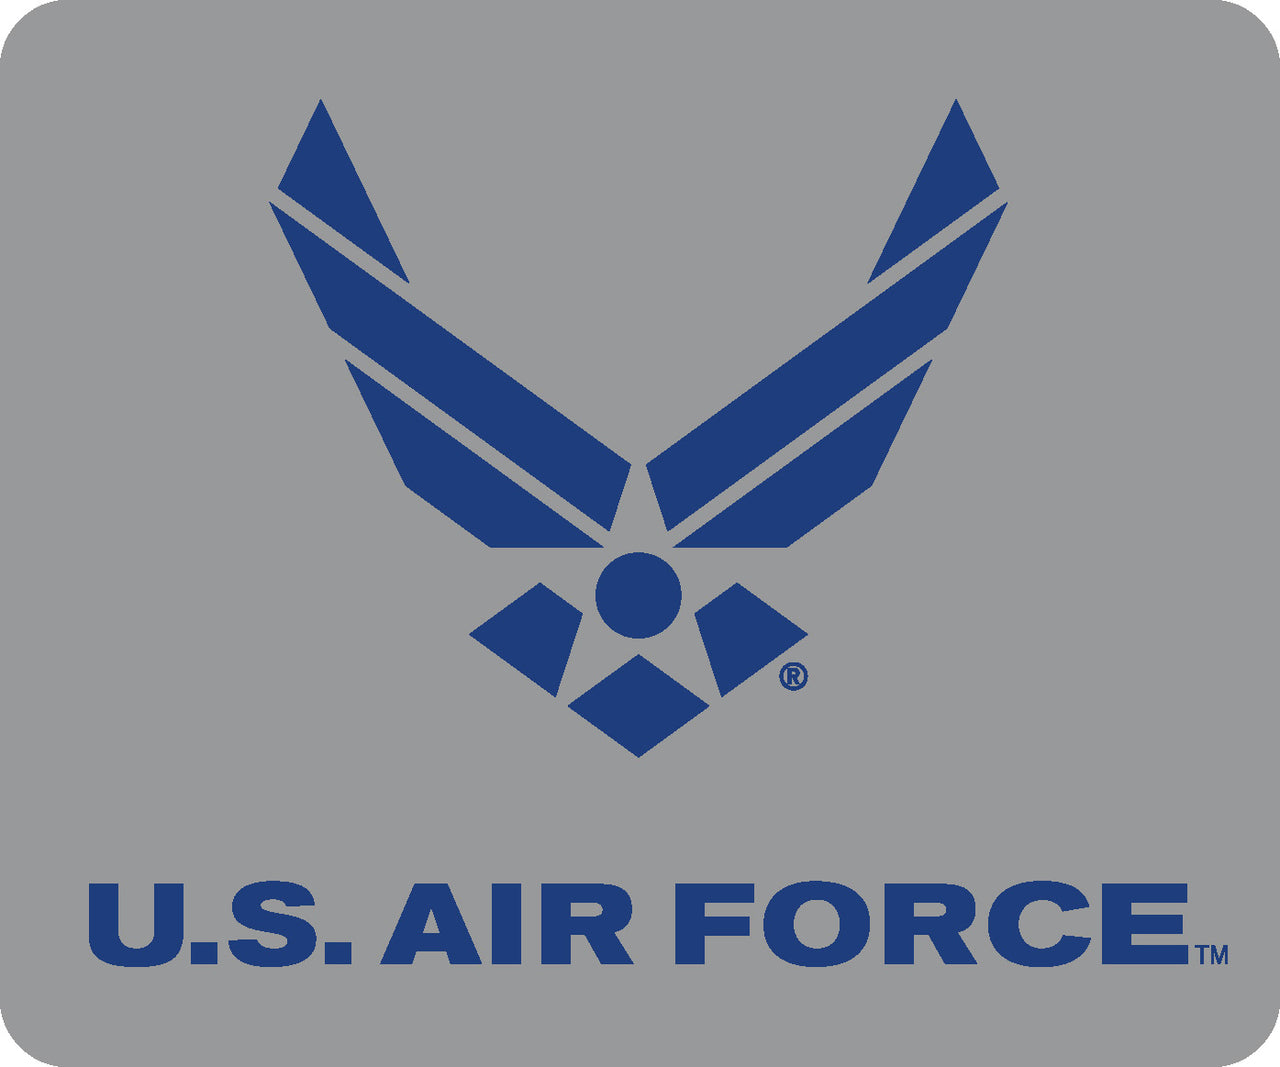 U.S. Air Force Symbol on Mouse Pad